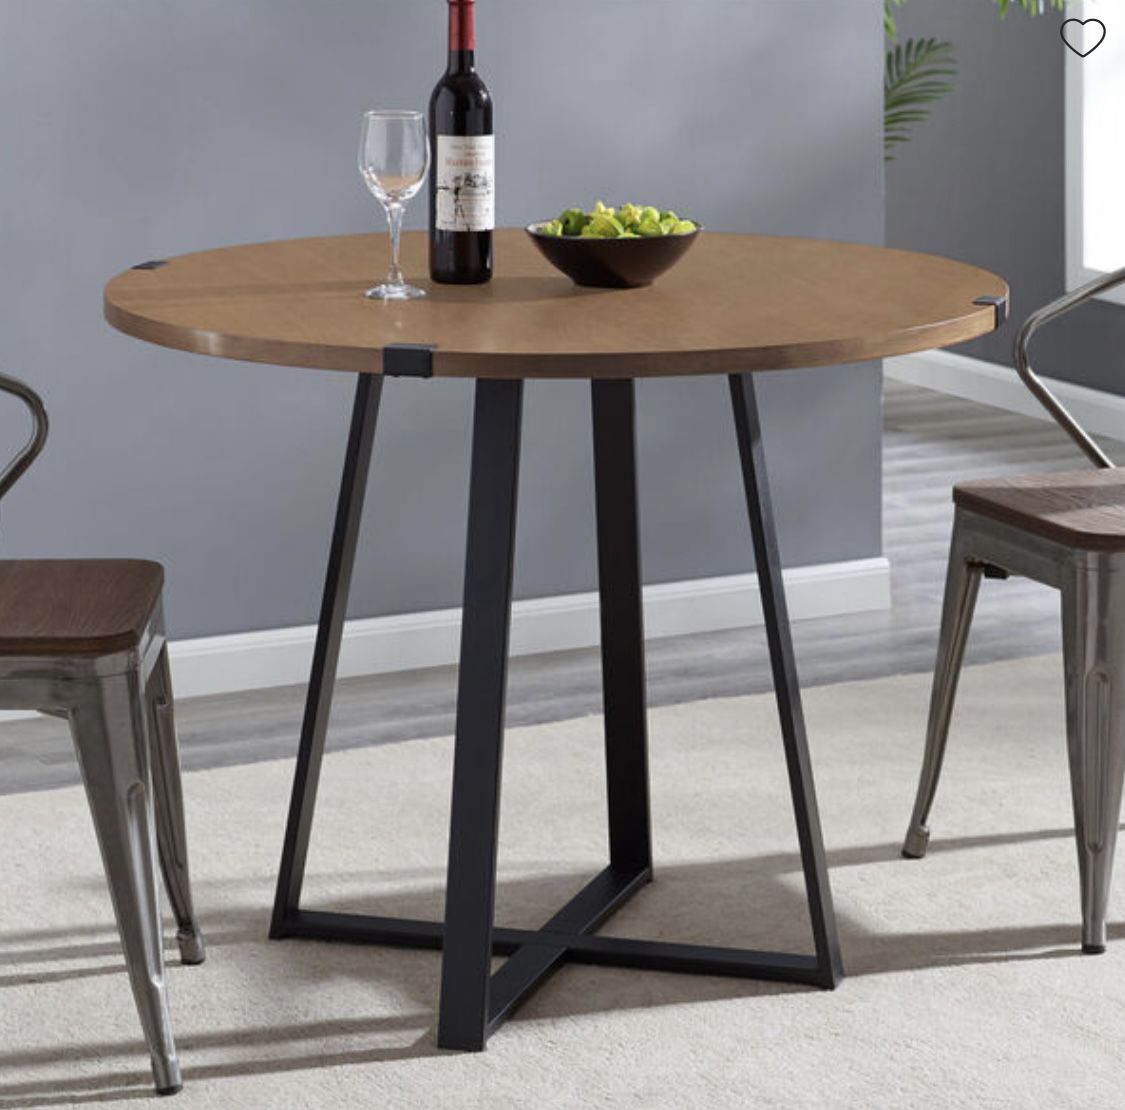 English Oak and Black Round Dining Table